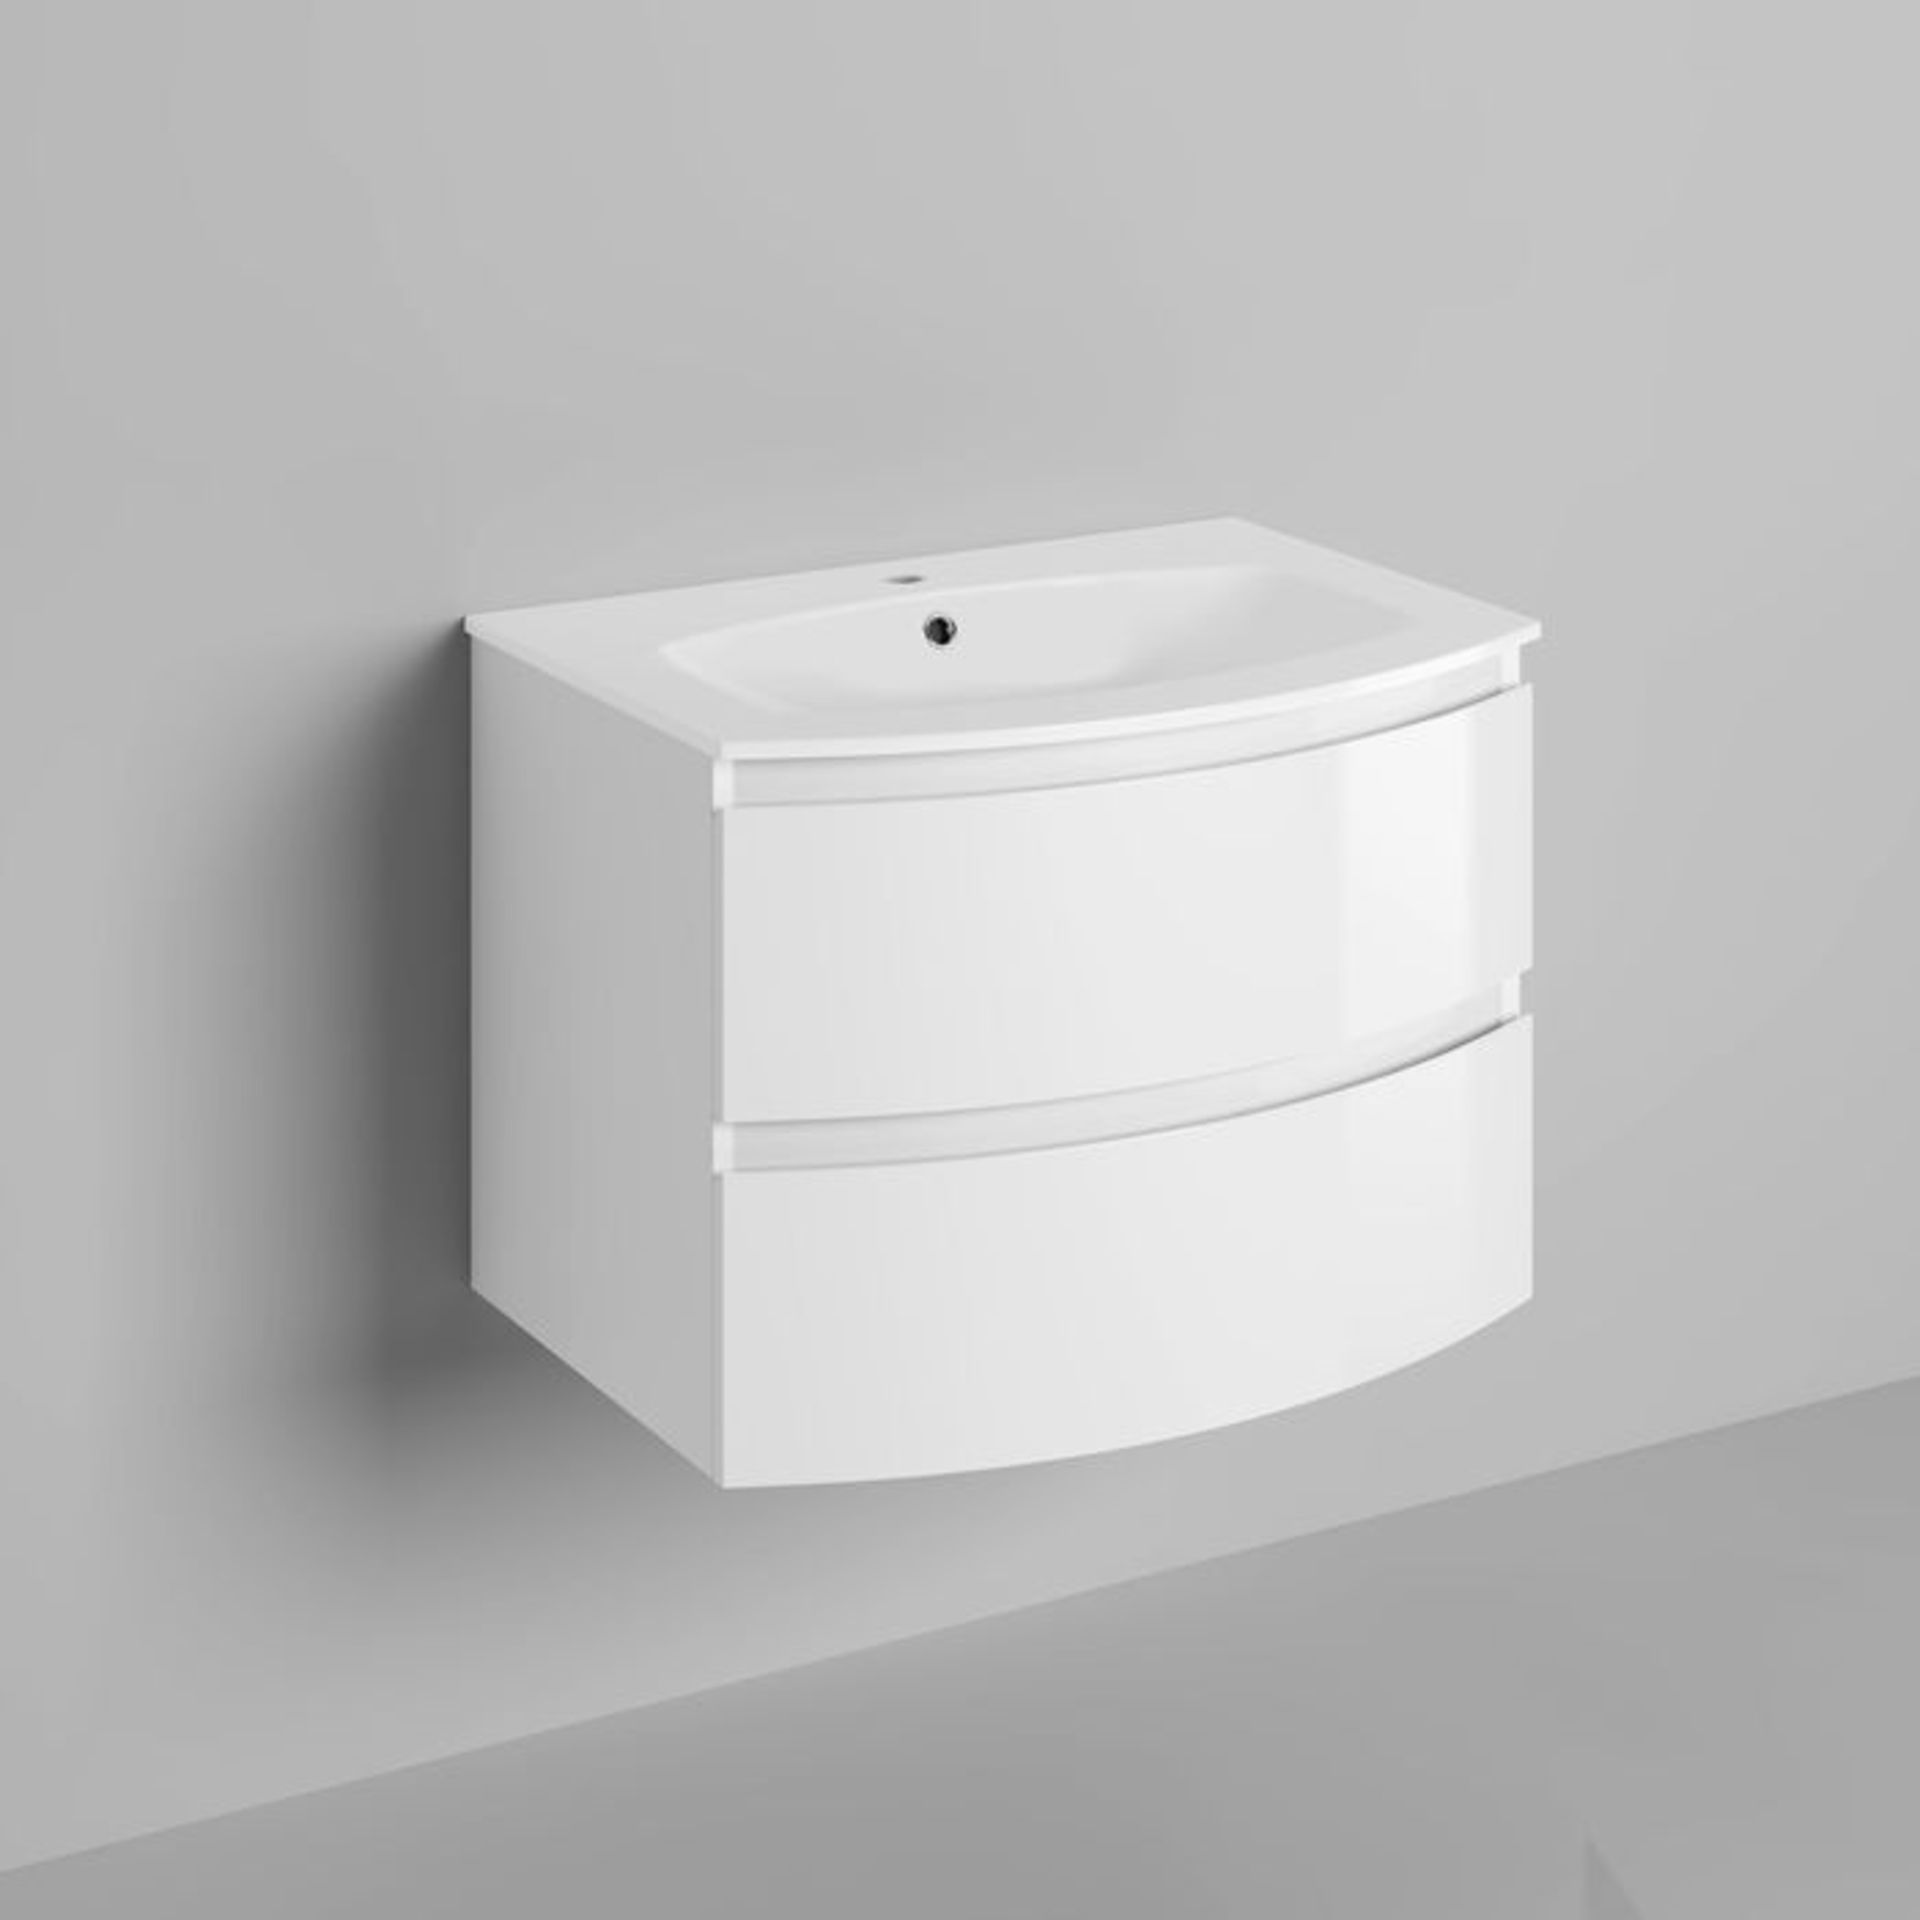 (TP6) 700mm Amelie High Gloss White Curved Vanity Unit - Wall Hung. comes complete with basin. - Image 3 of 4